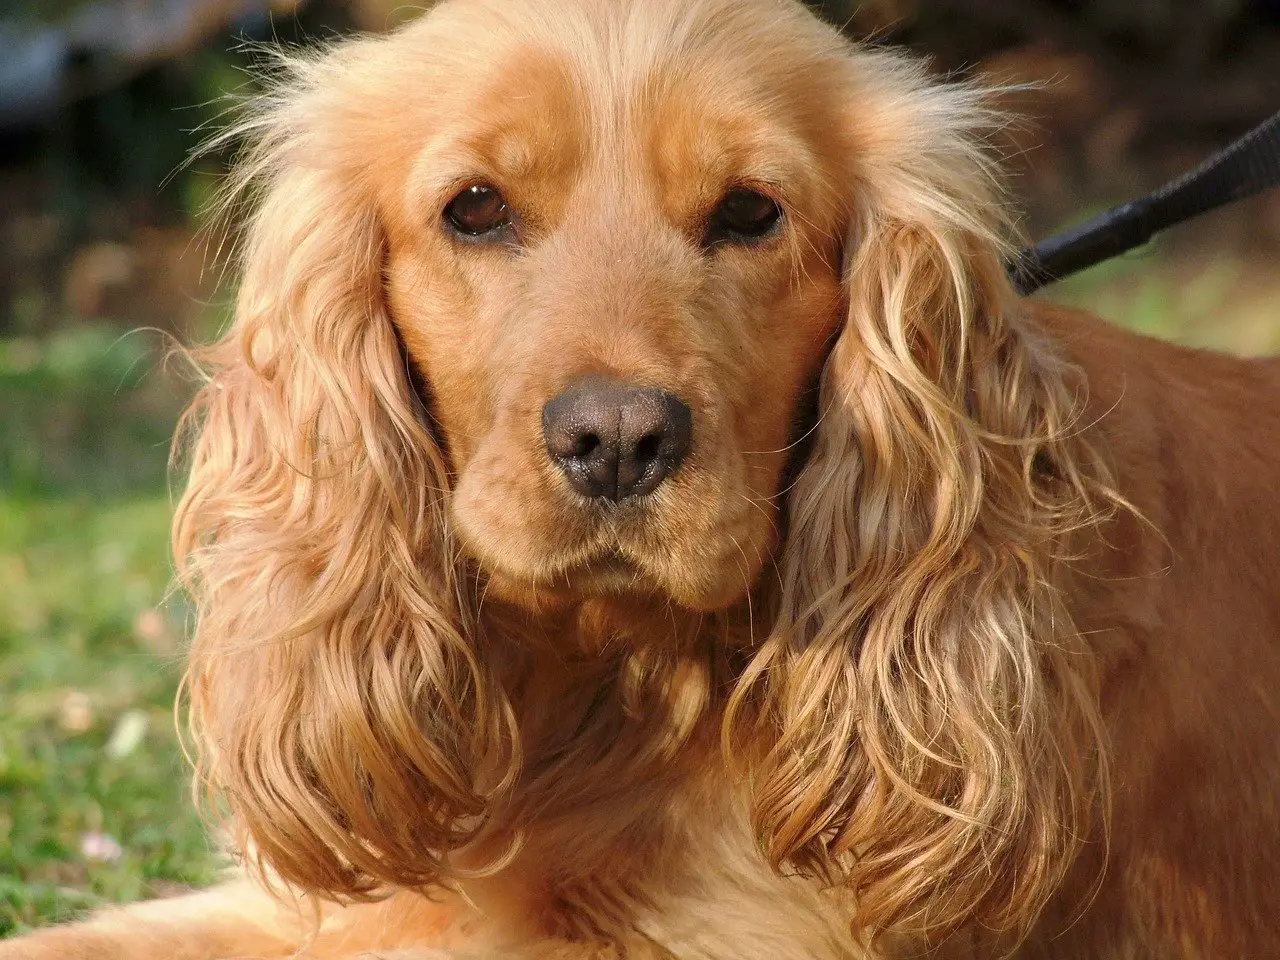 Why Do Cocker Spaniels Have Long Ears?